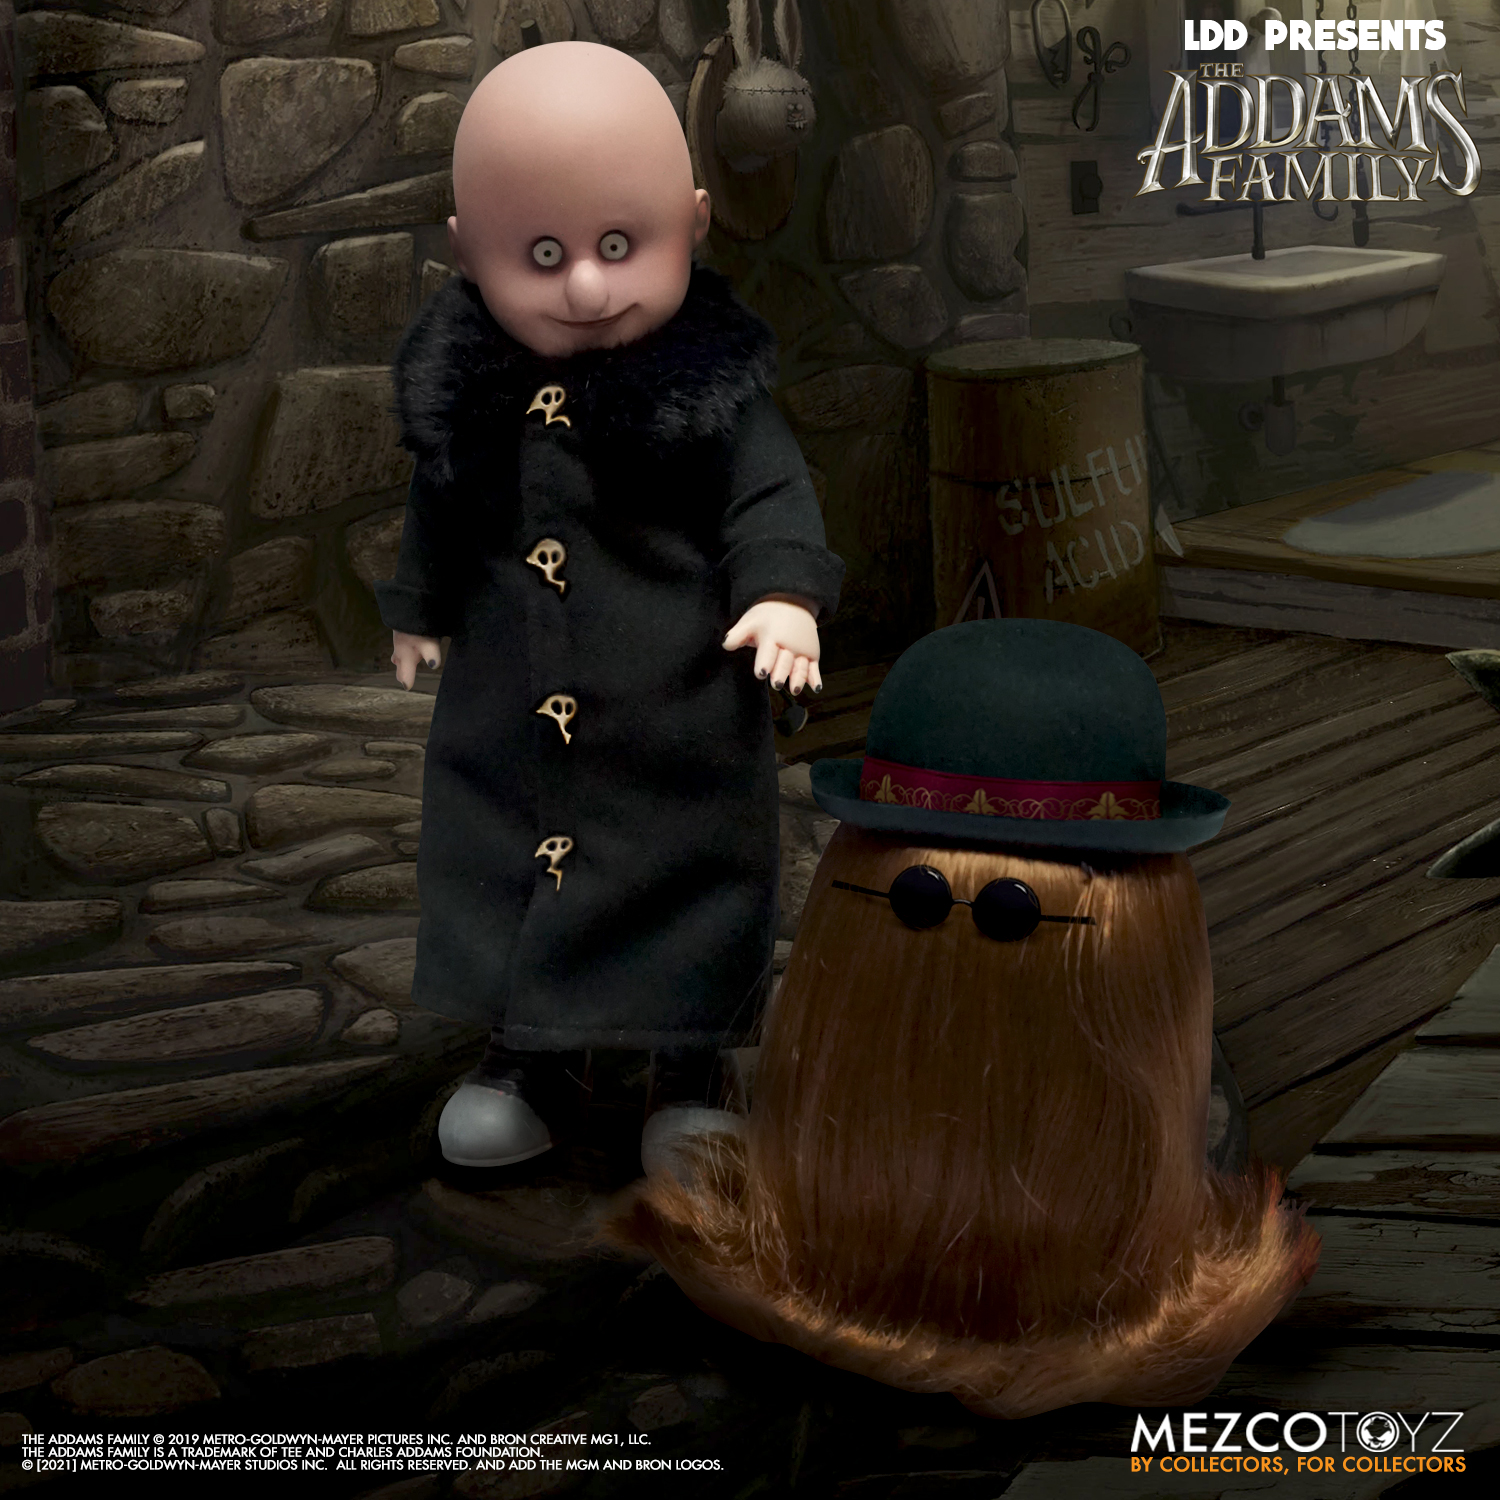 Addams Family Thing by JS-studio